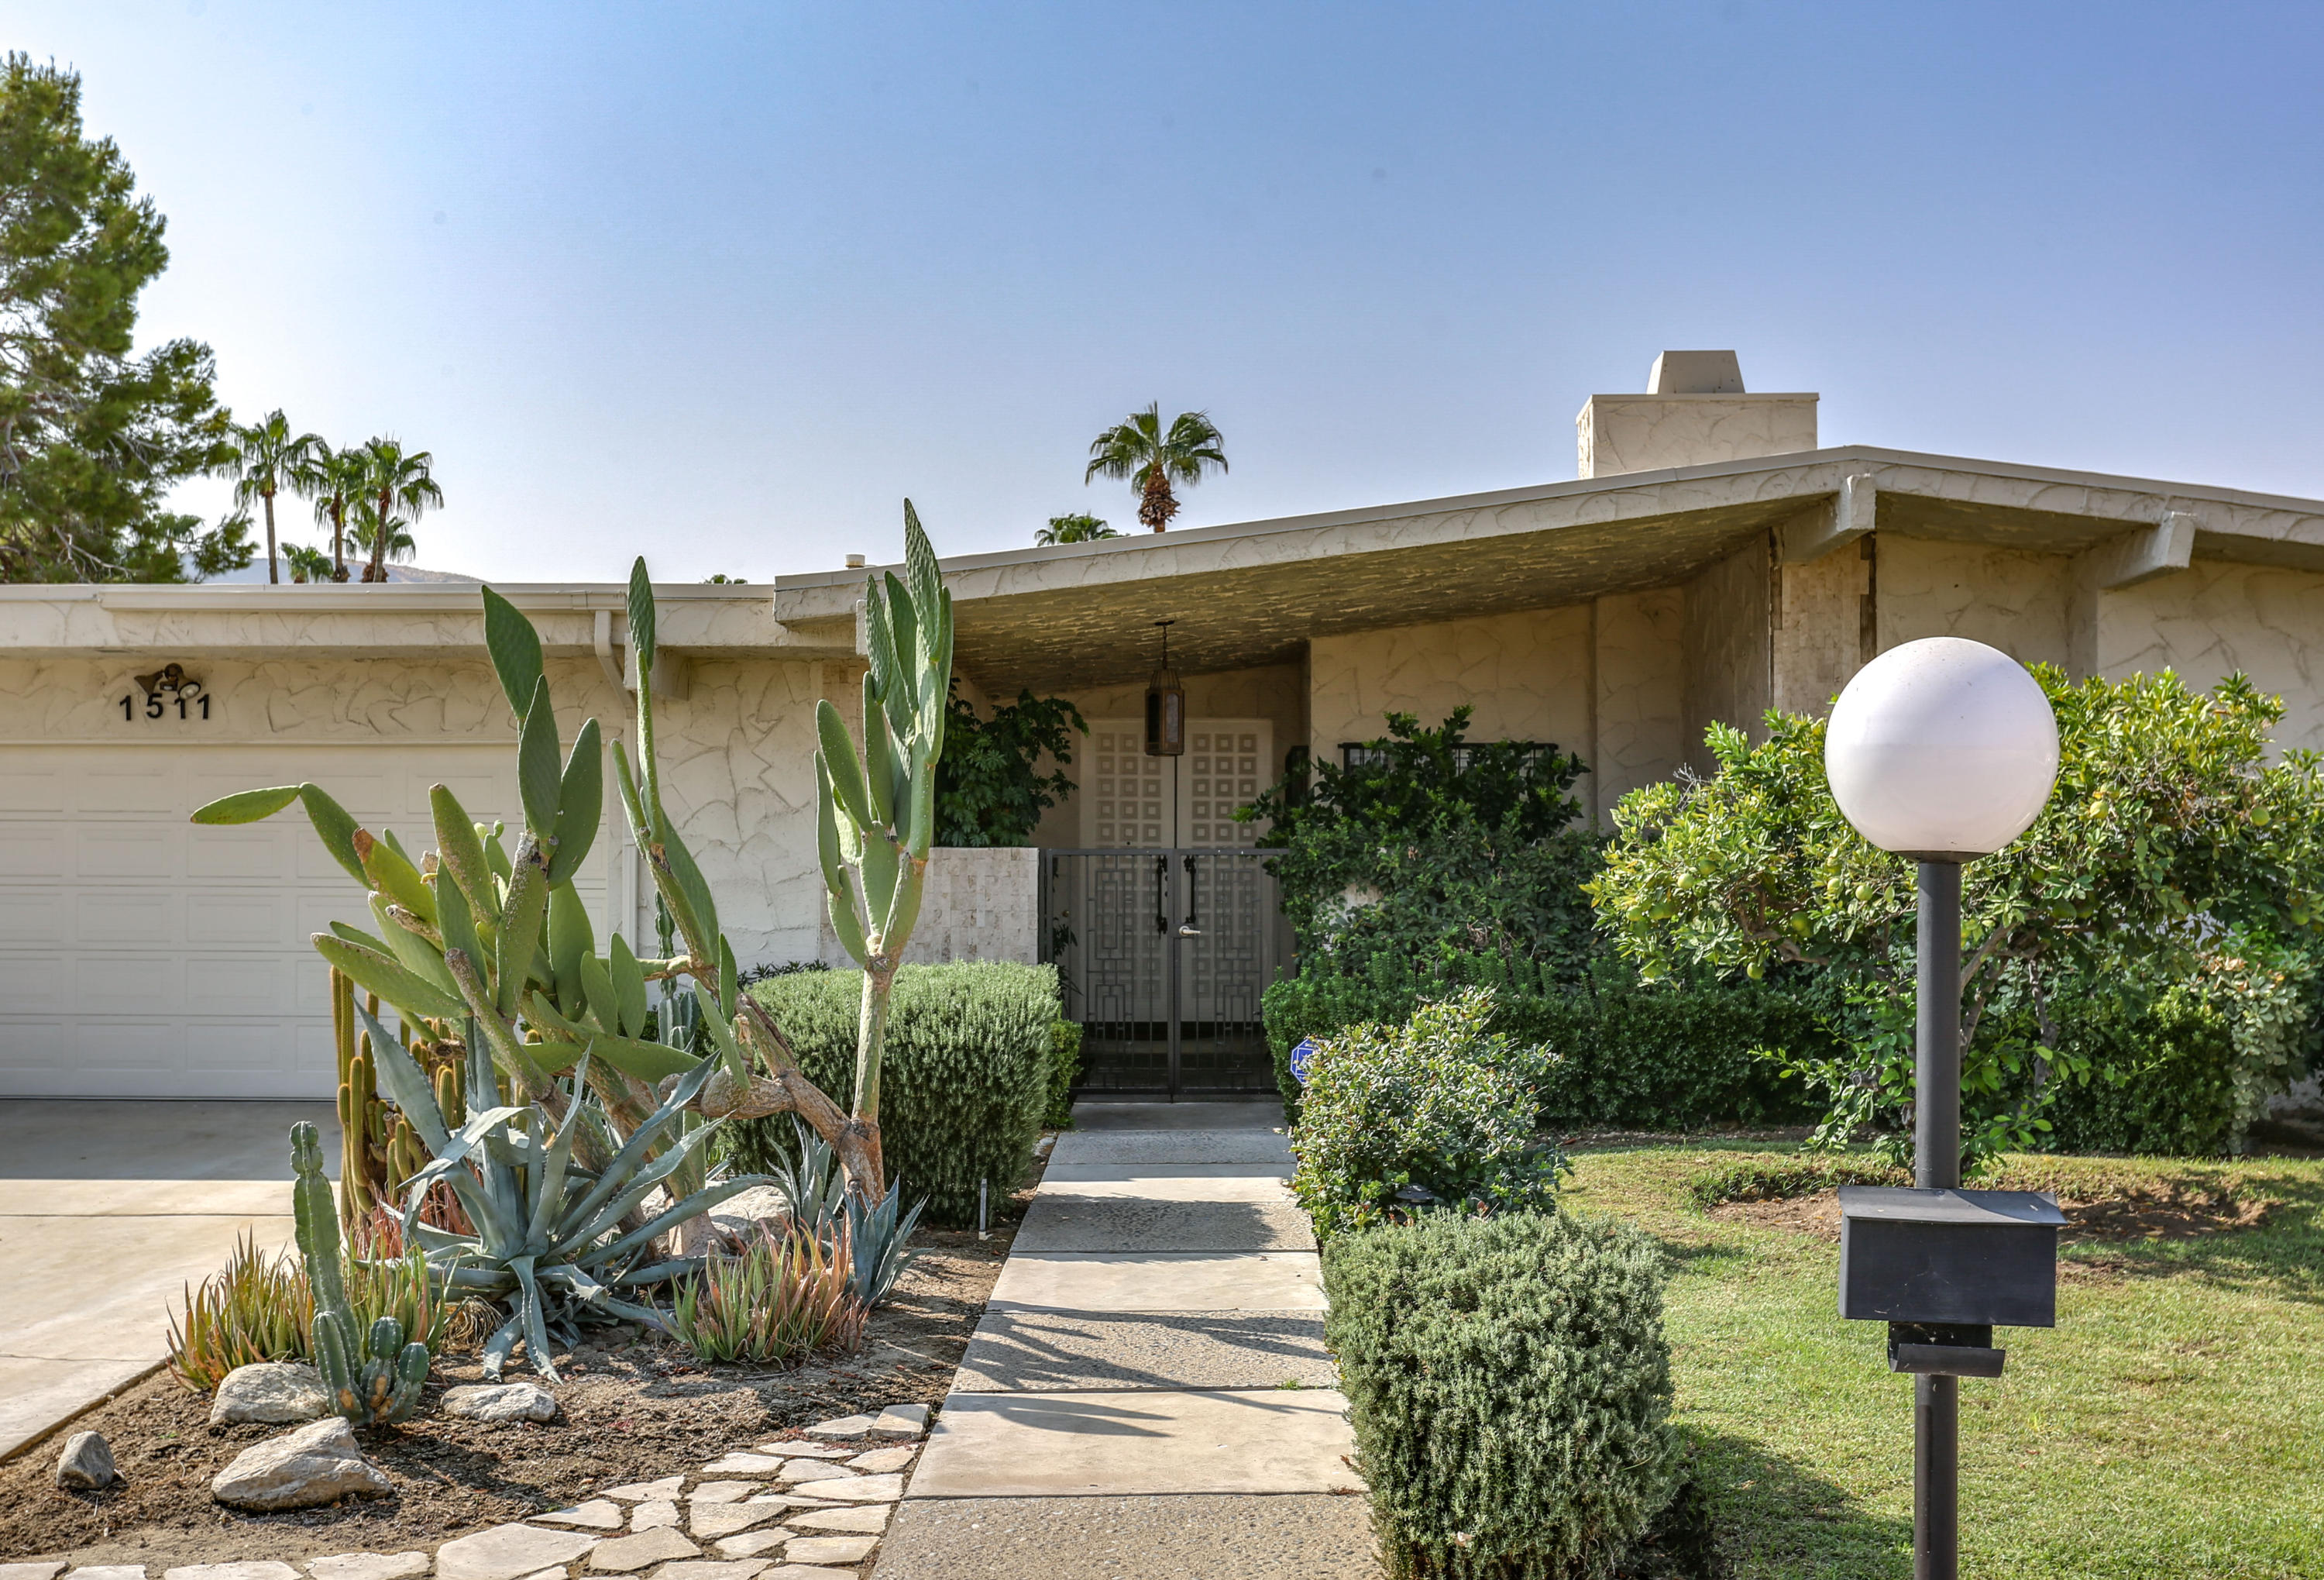 Image 1 for 1511 E Twin Palms Drive